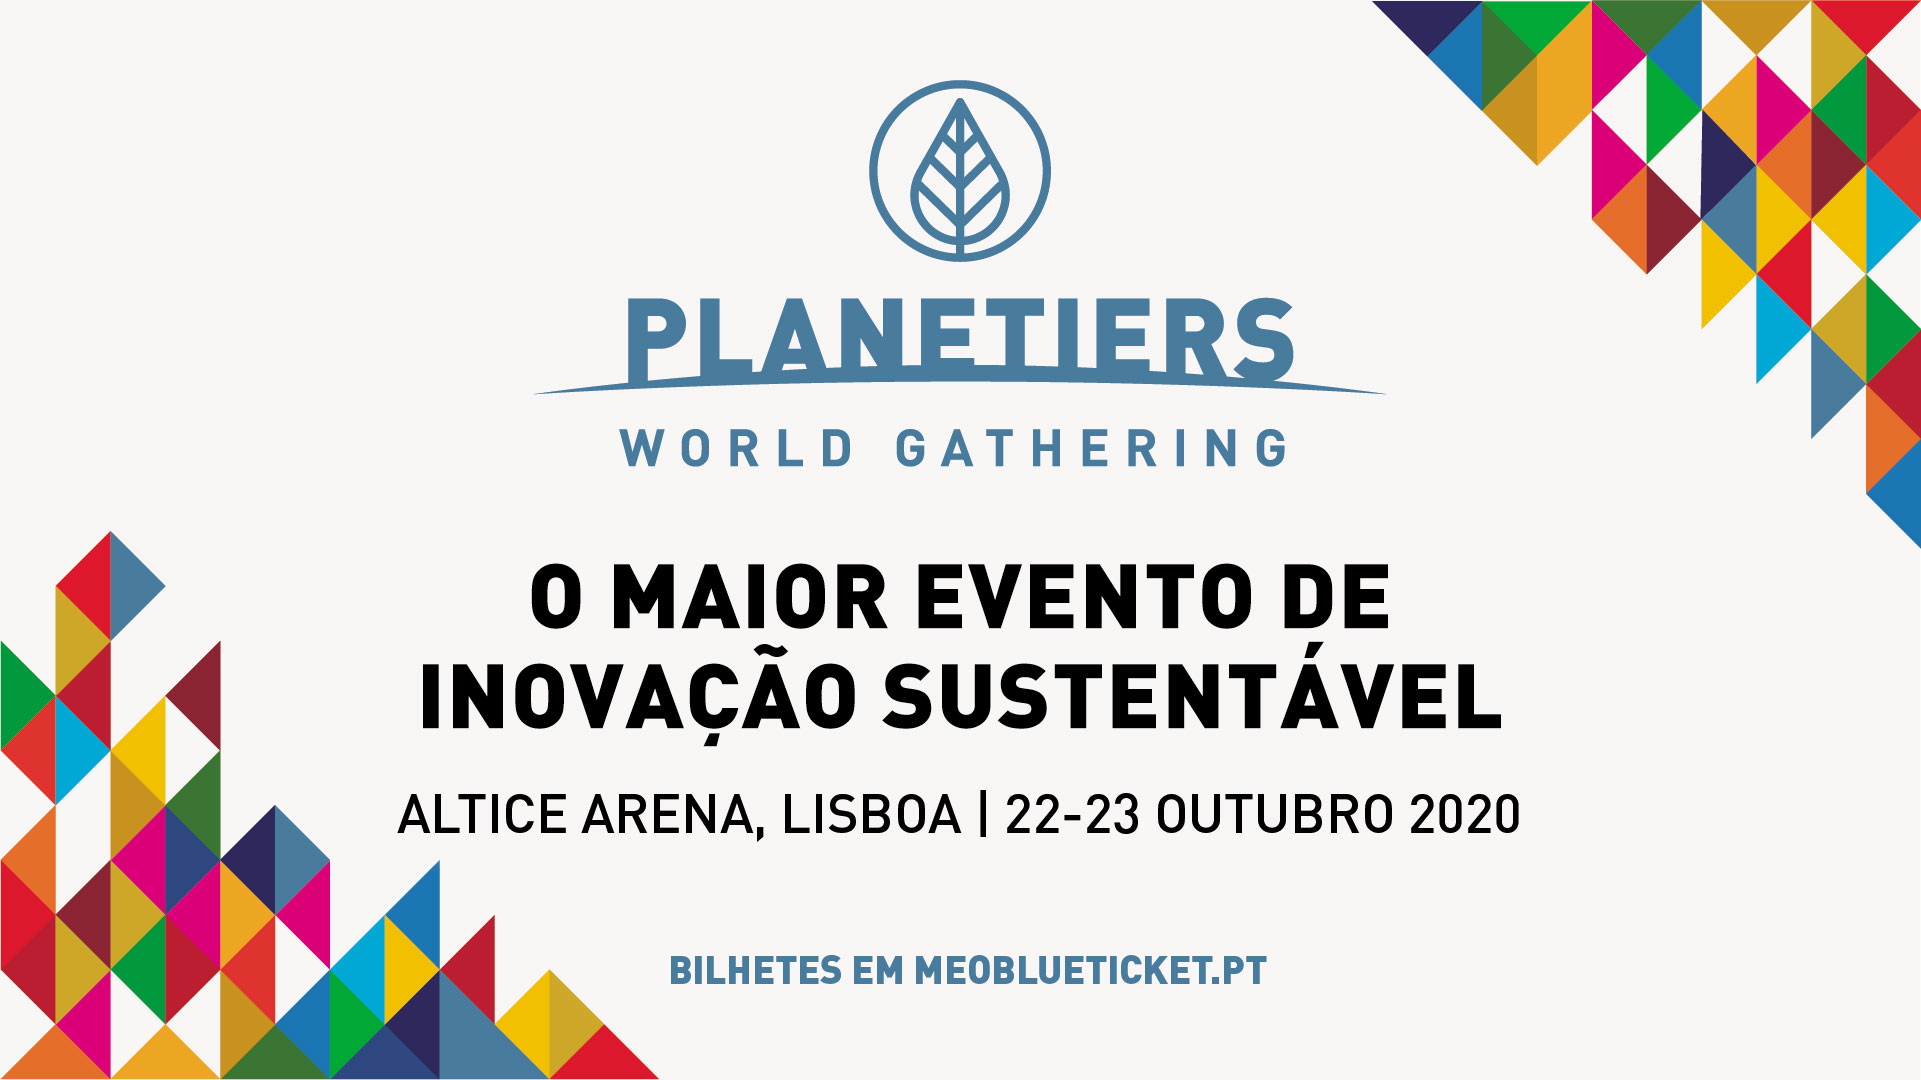 Planetiers World Gathering 2020